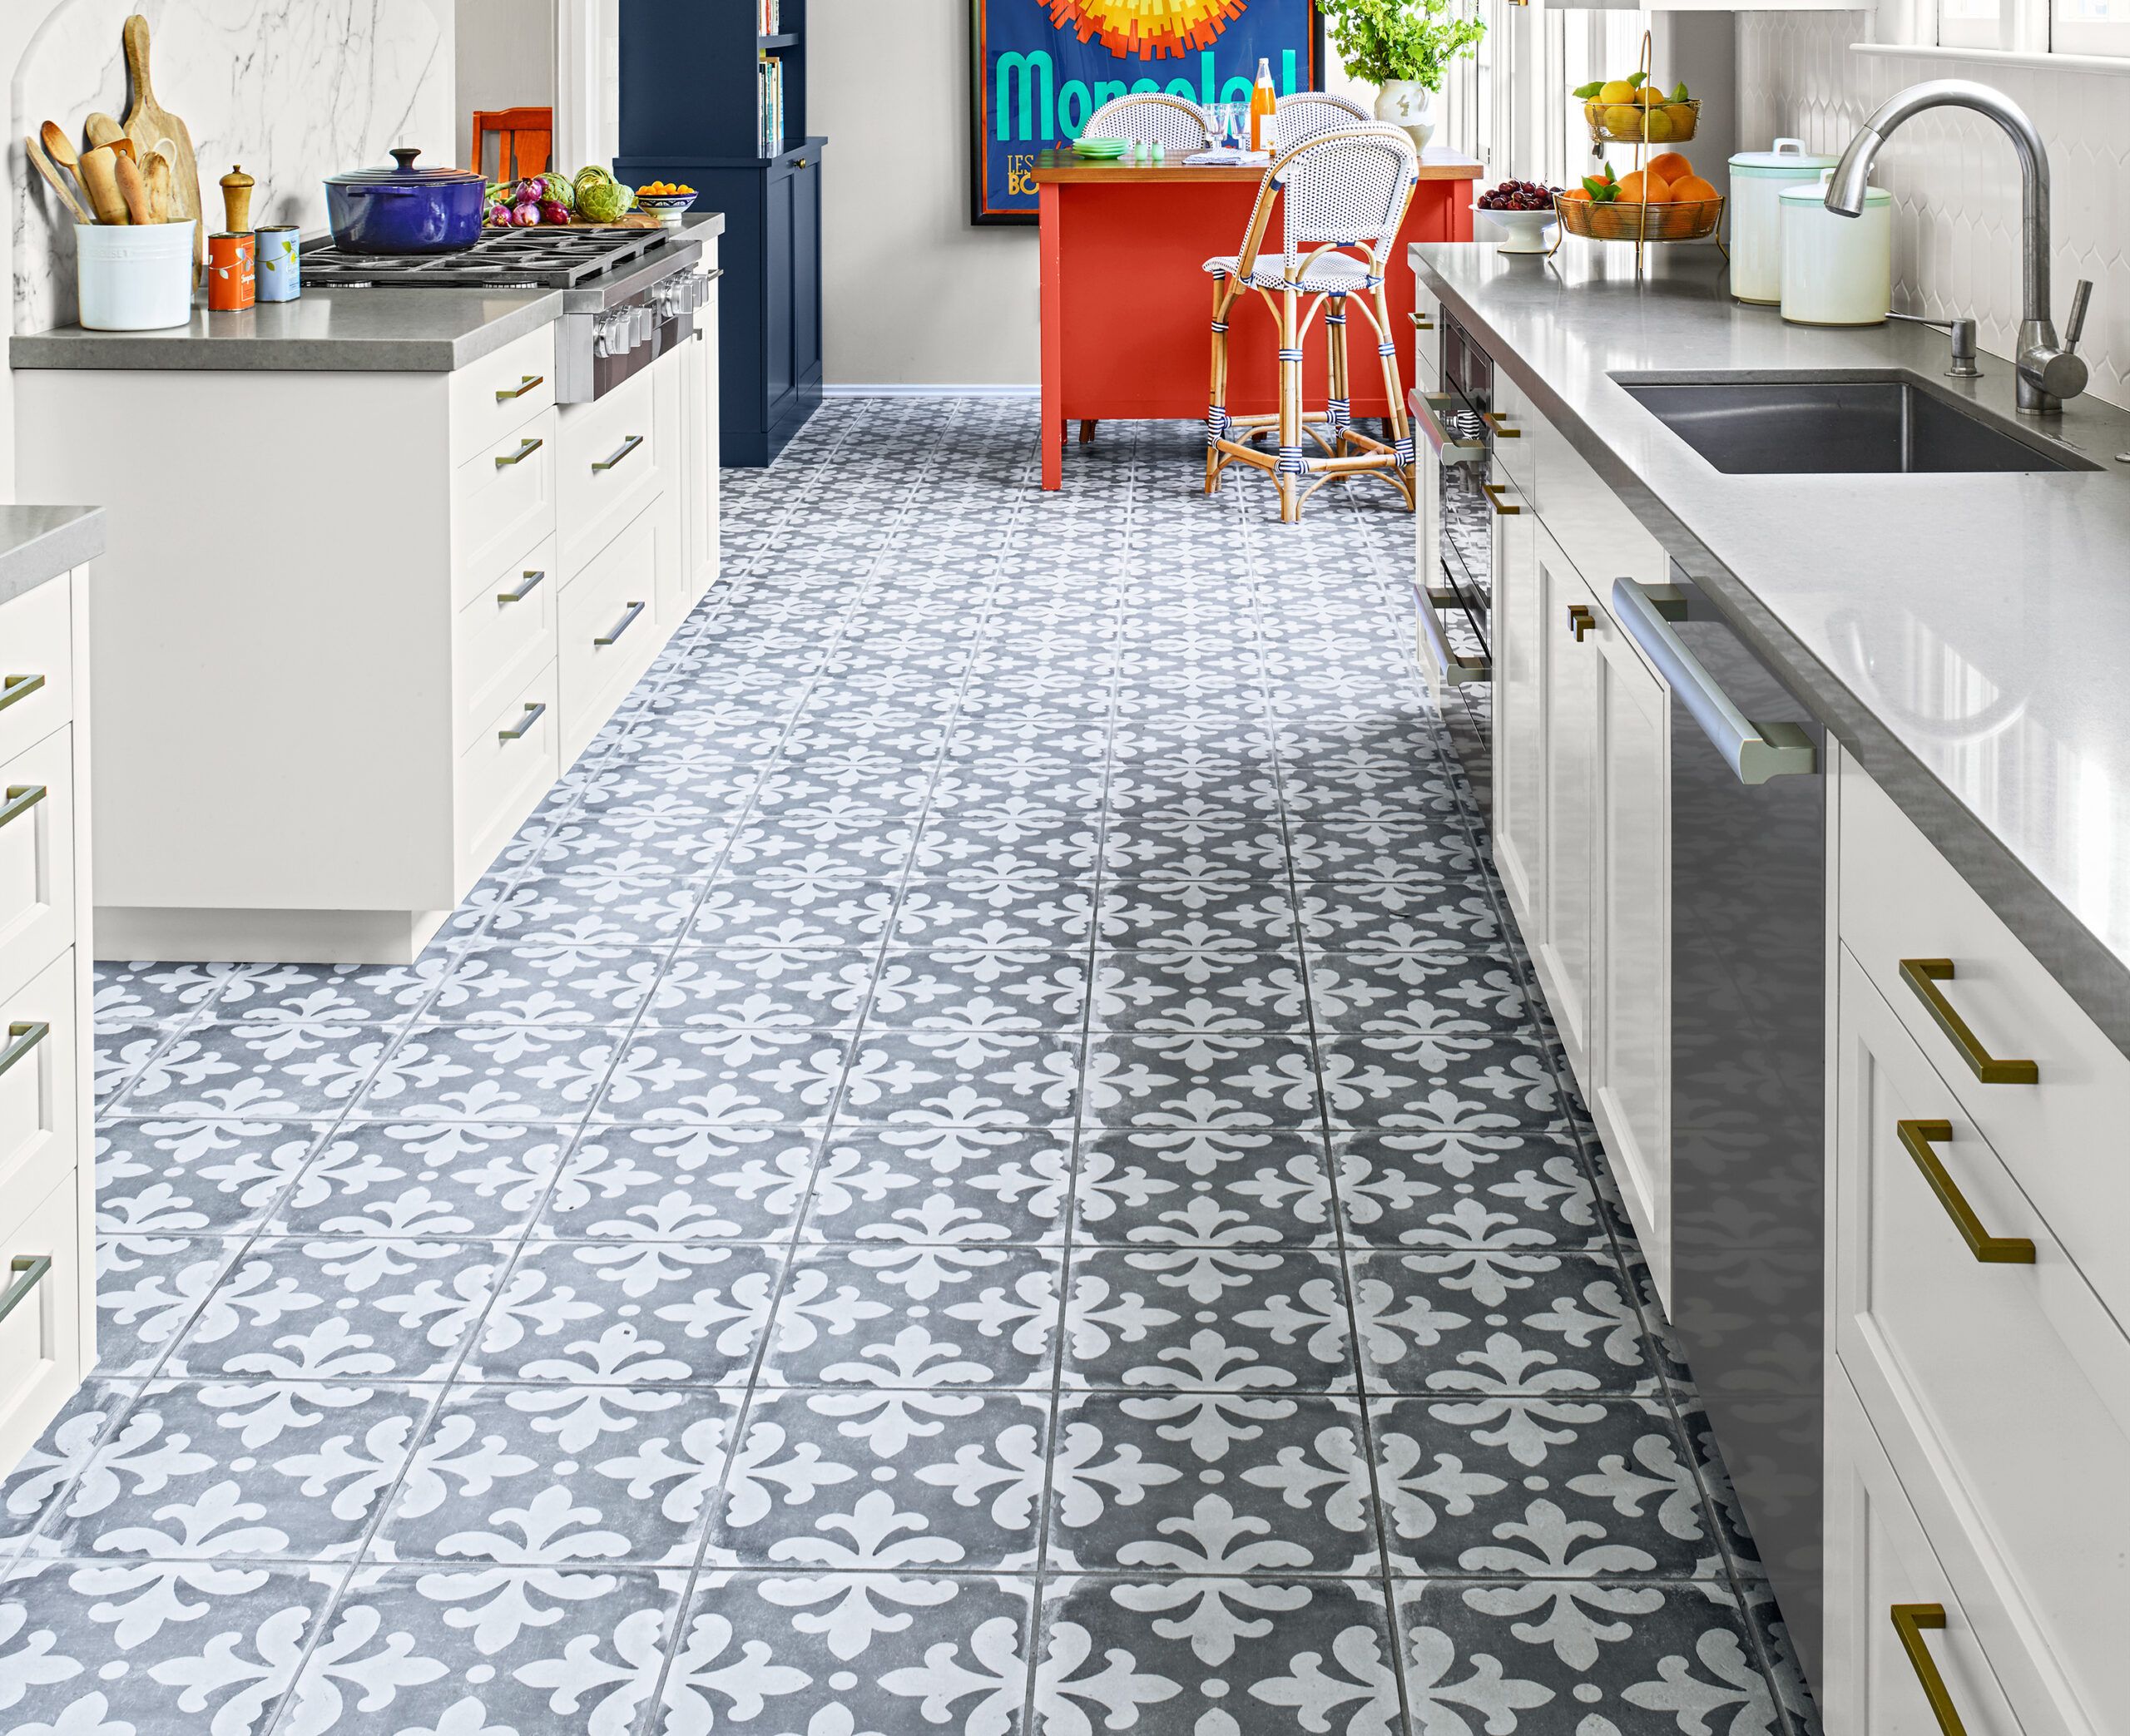 kitchen flooring materials and ideas - this old house